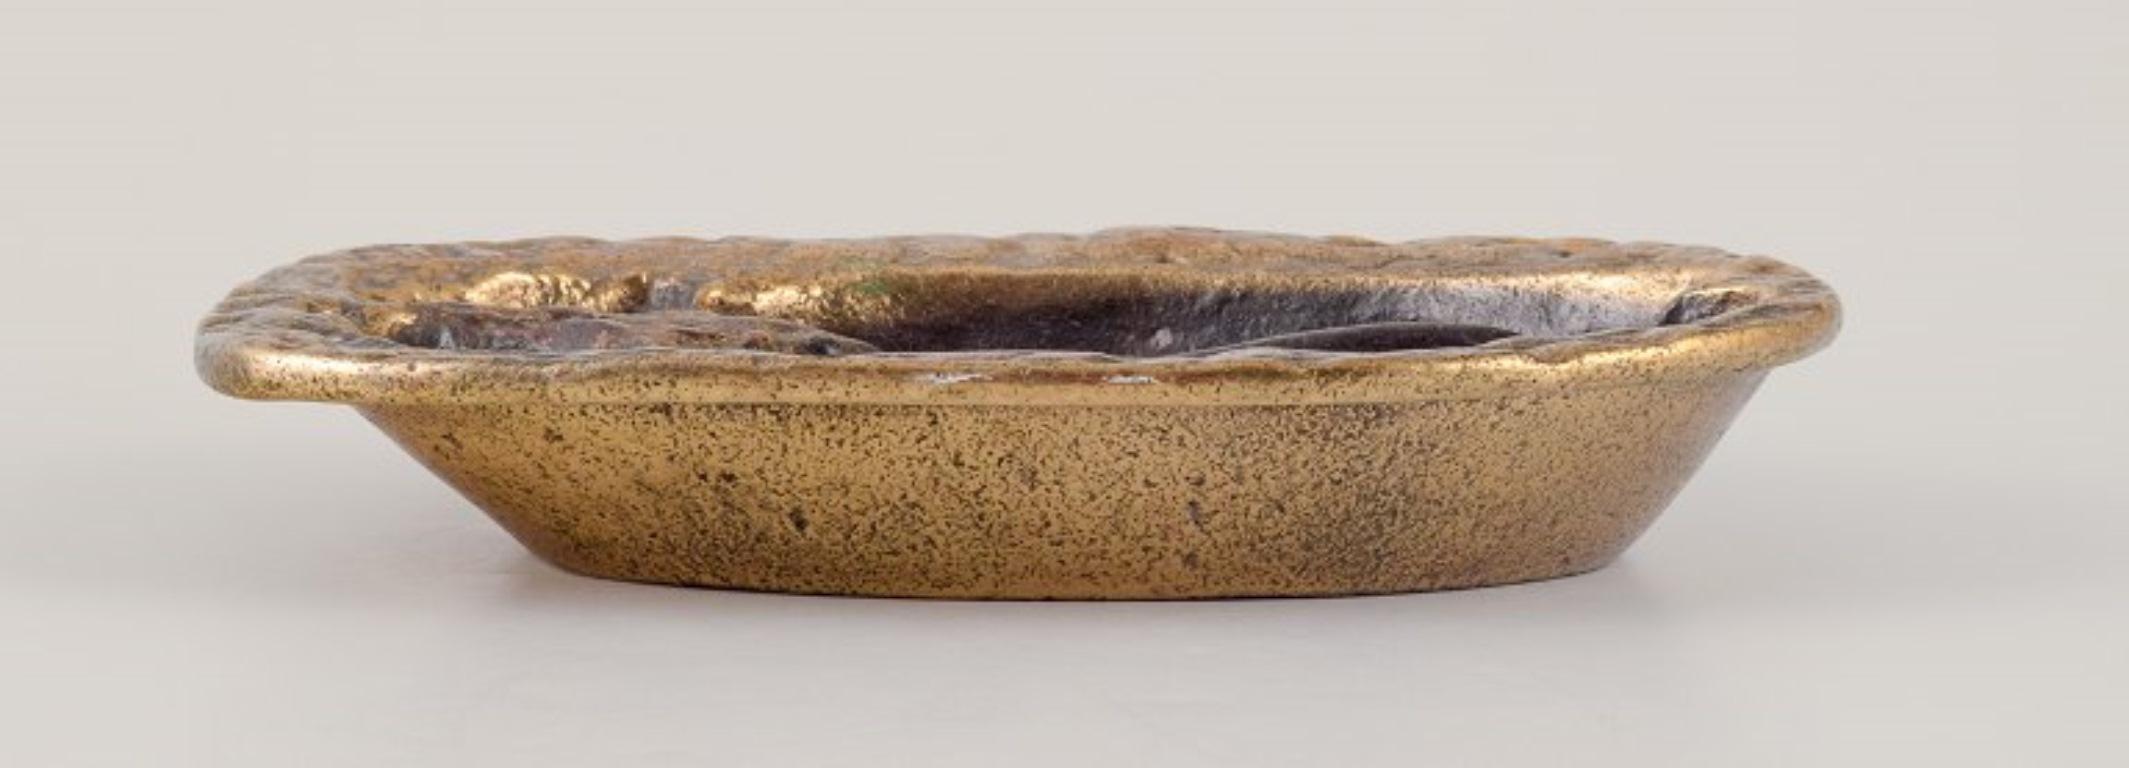 Swedish sculptor. Modernist bronze bowl in the shape of an elk's hoof. 
Solid bronze.
Marked with a monogram.
Late 20th century.
In perfect condition.
Dimensions: L 22.5 cm x W 15.6 cm x H 3.5 cm.